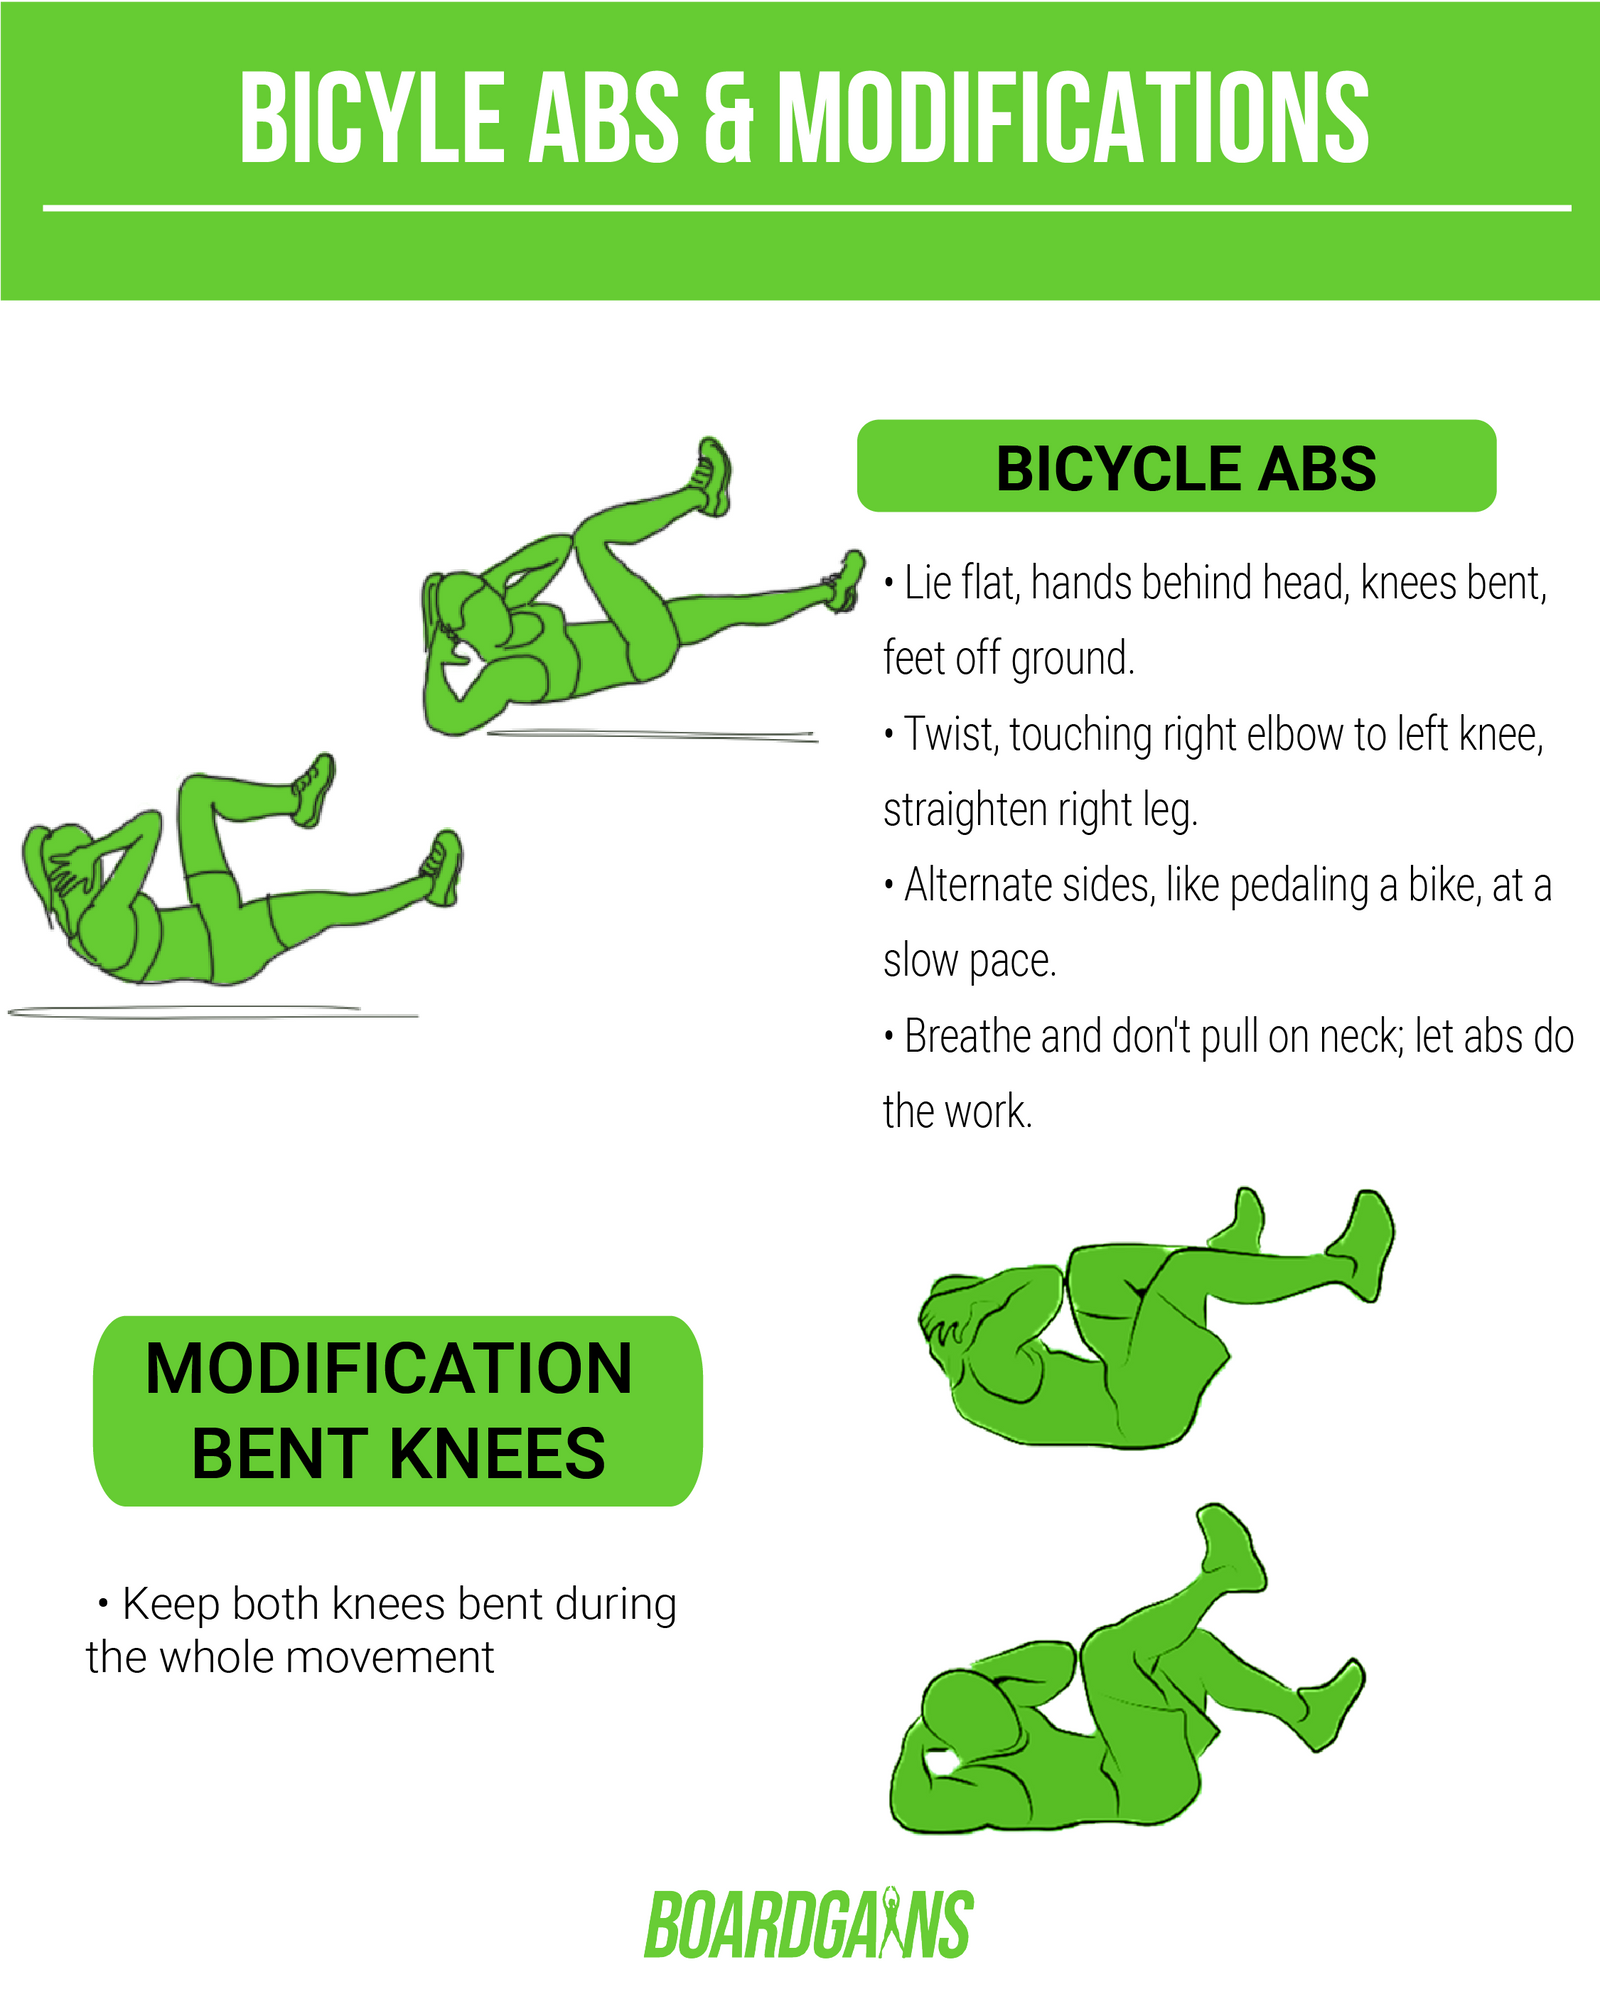 How to Bicycle Ab Properly: Correct Form, Mistakes, and Variations - A Step-By-Step Guide - Boardgains